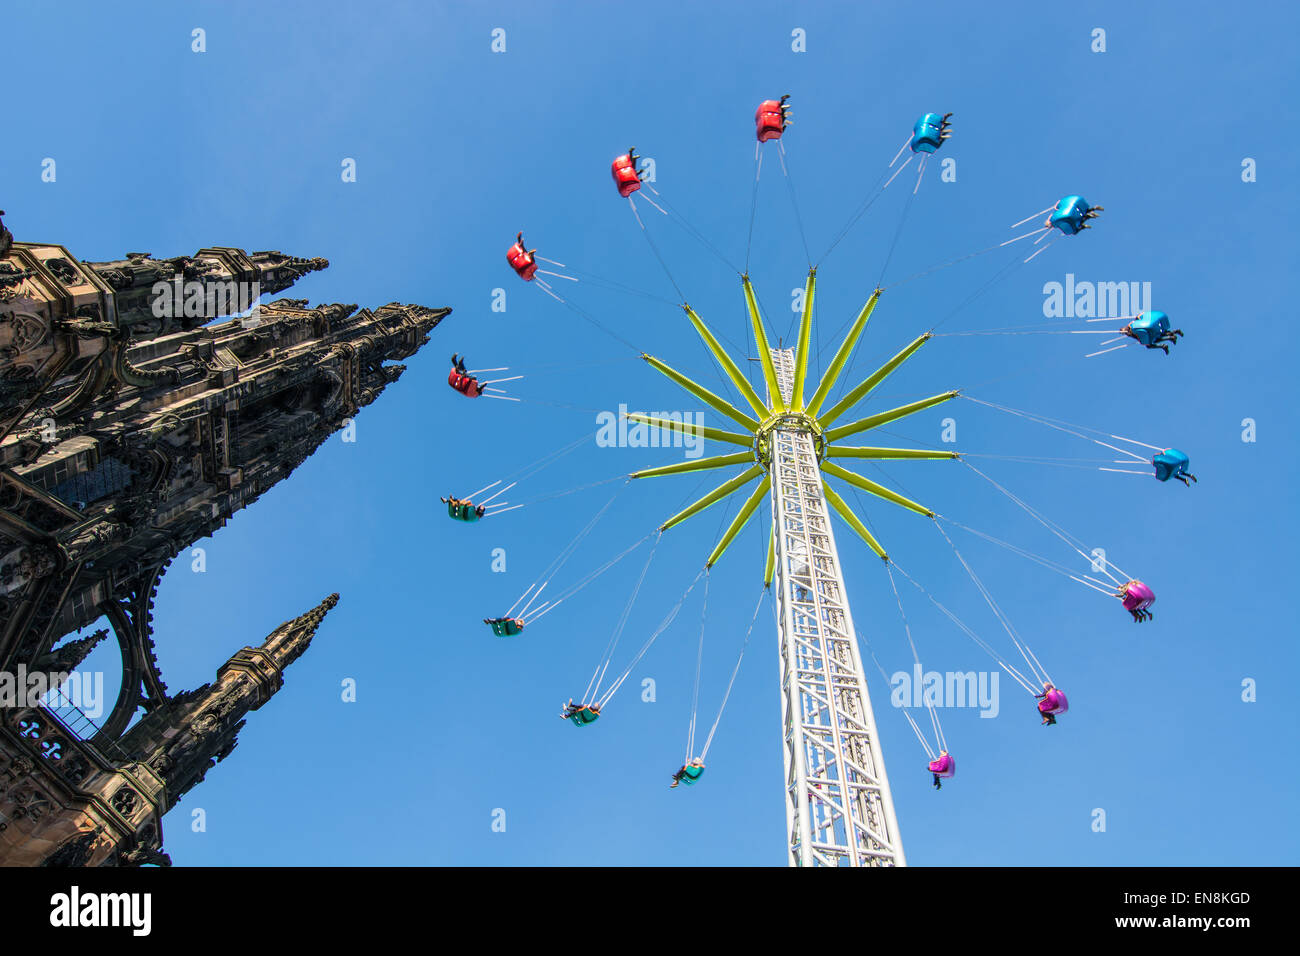 Edinburgh starflyer attraction with blue sky and Scott Monument during Christmas winter fair Stock Photo